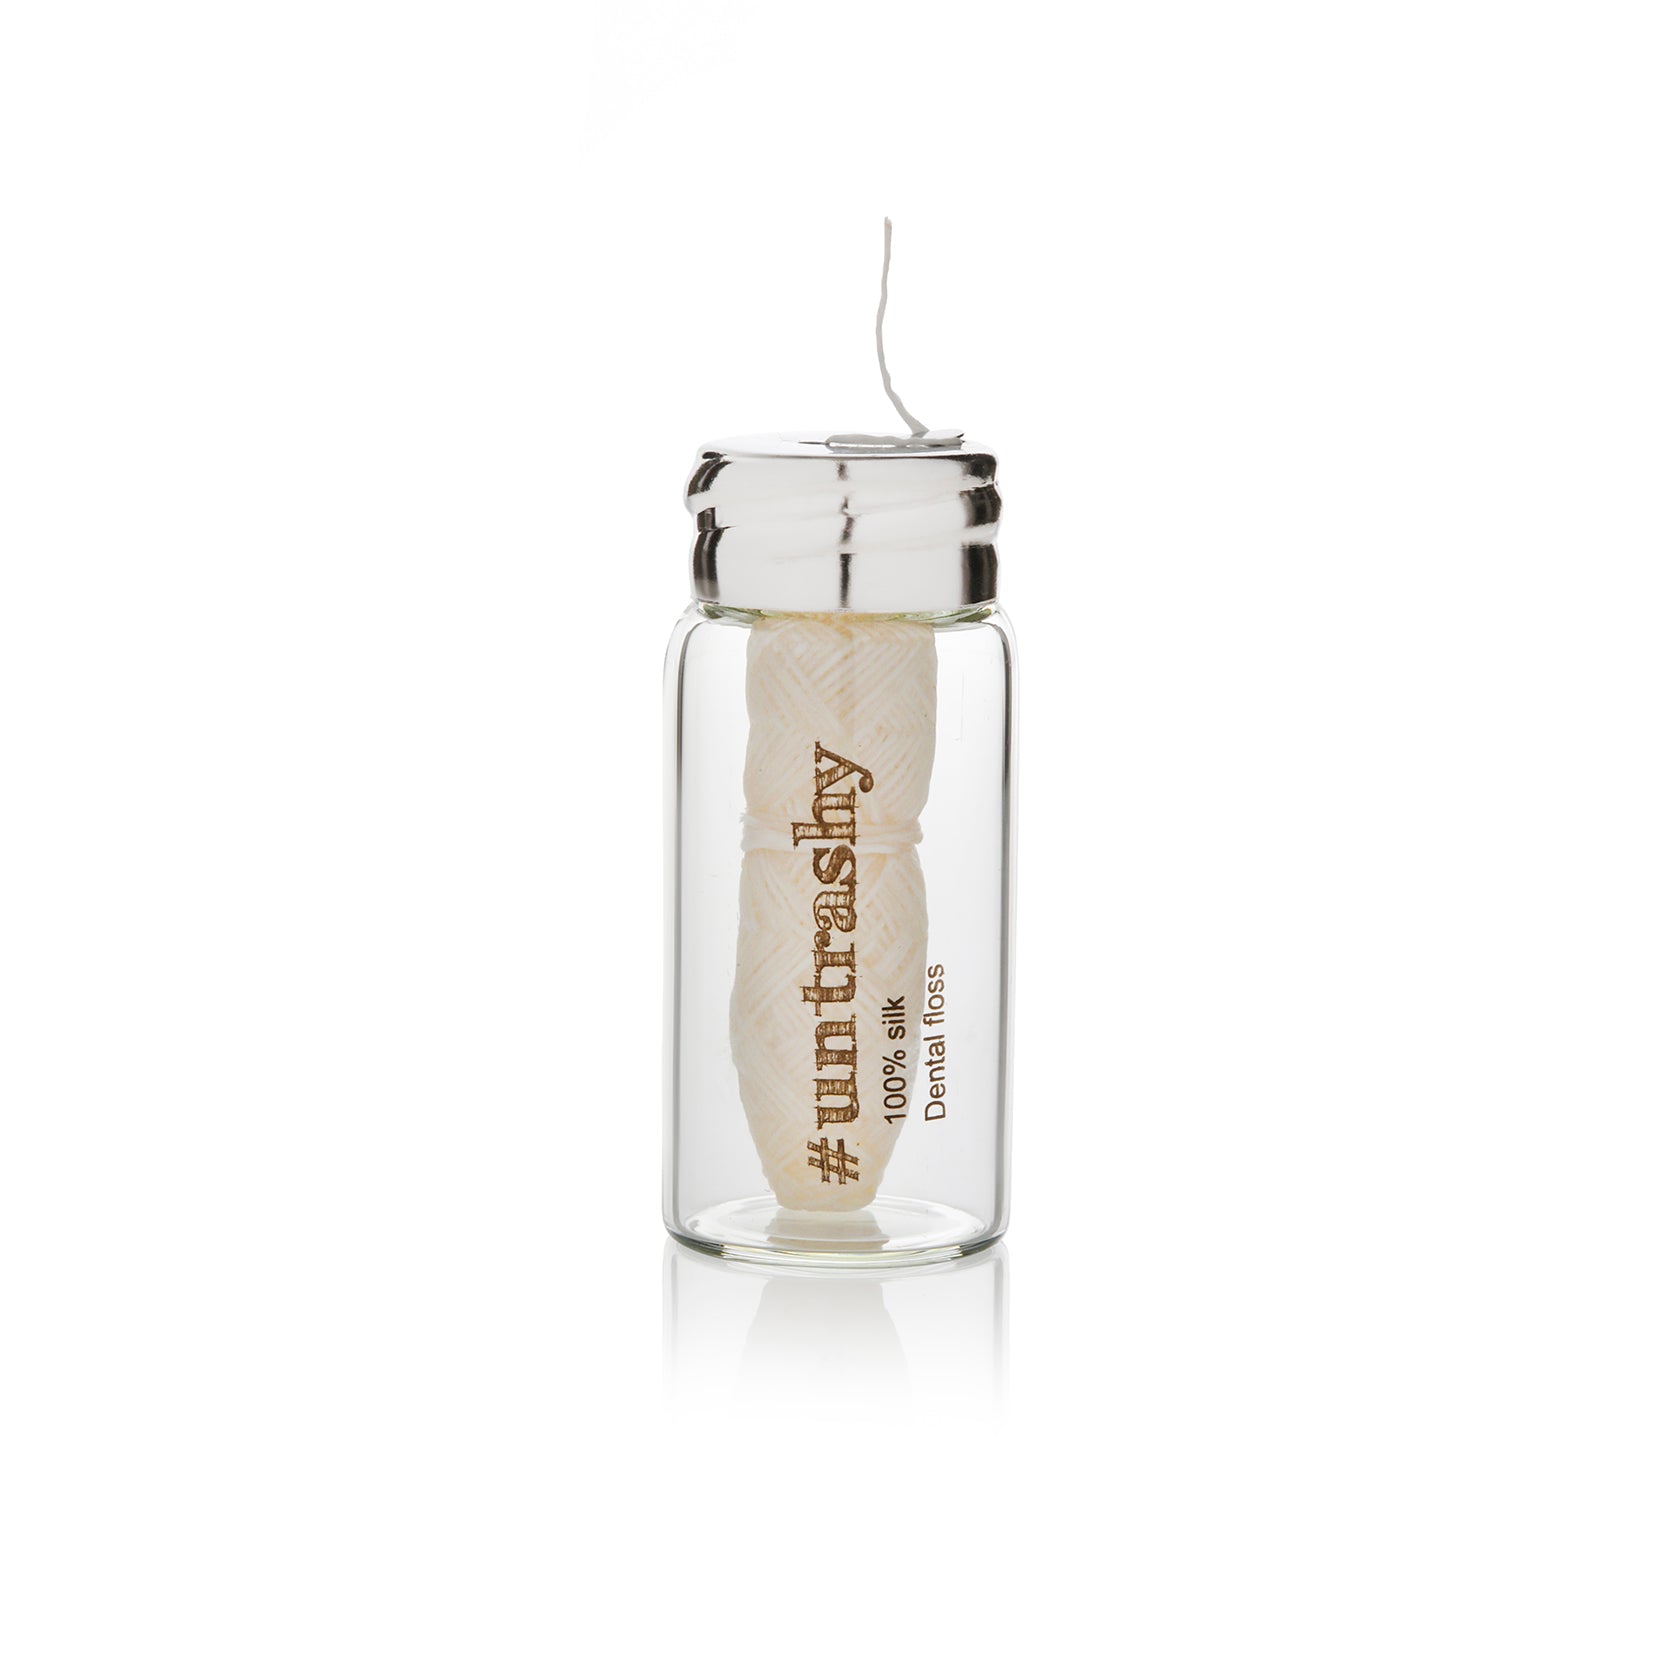 Silk dental floss in a glass jar on a white background